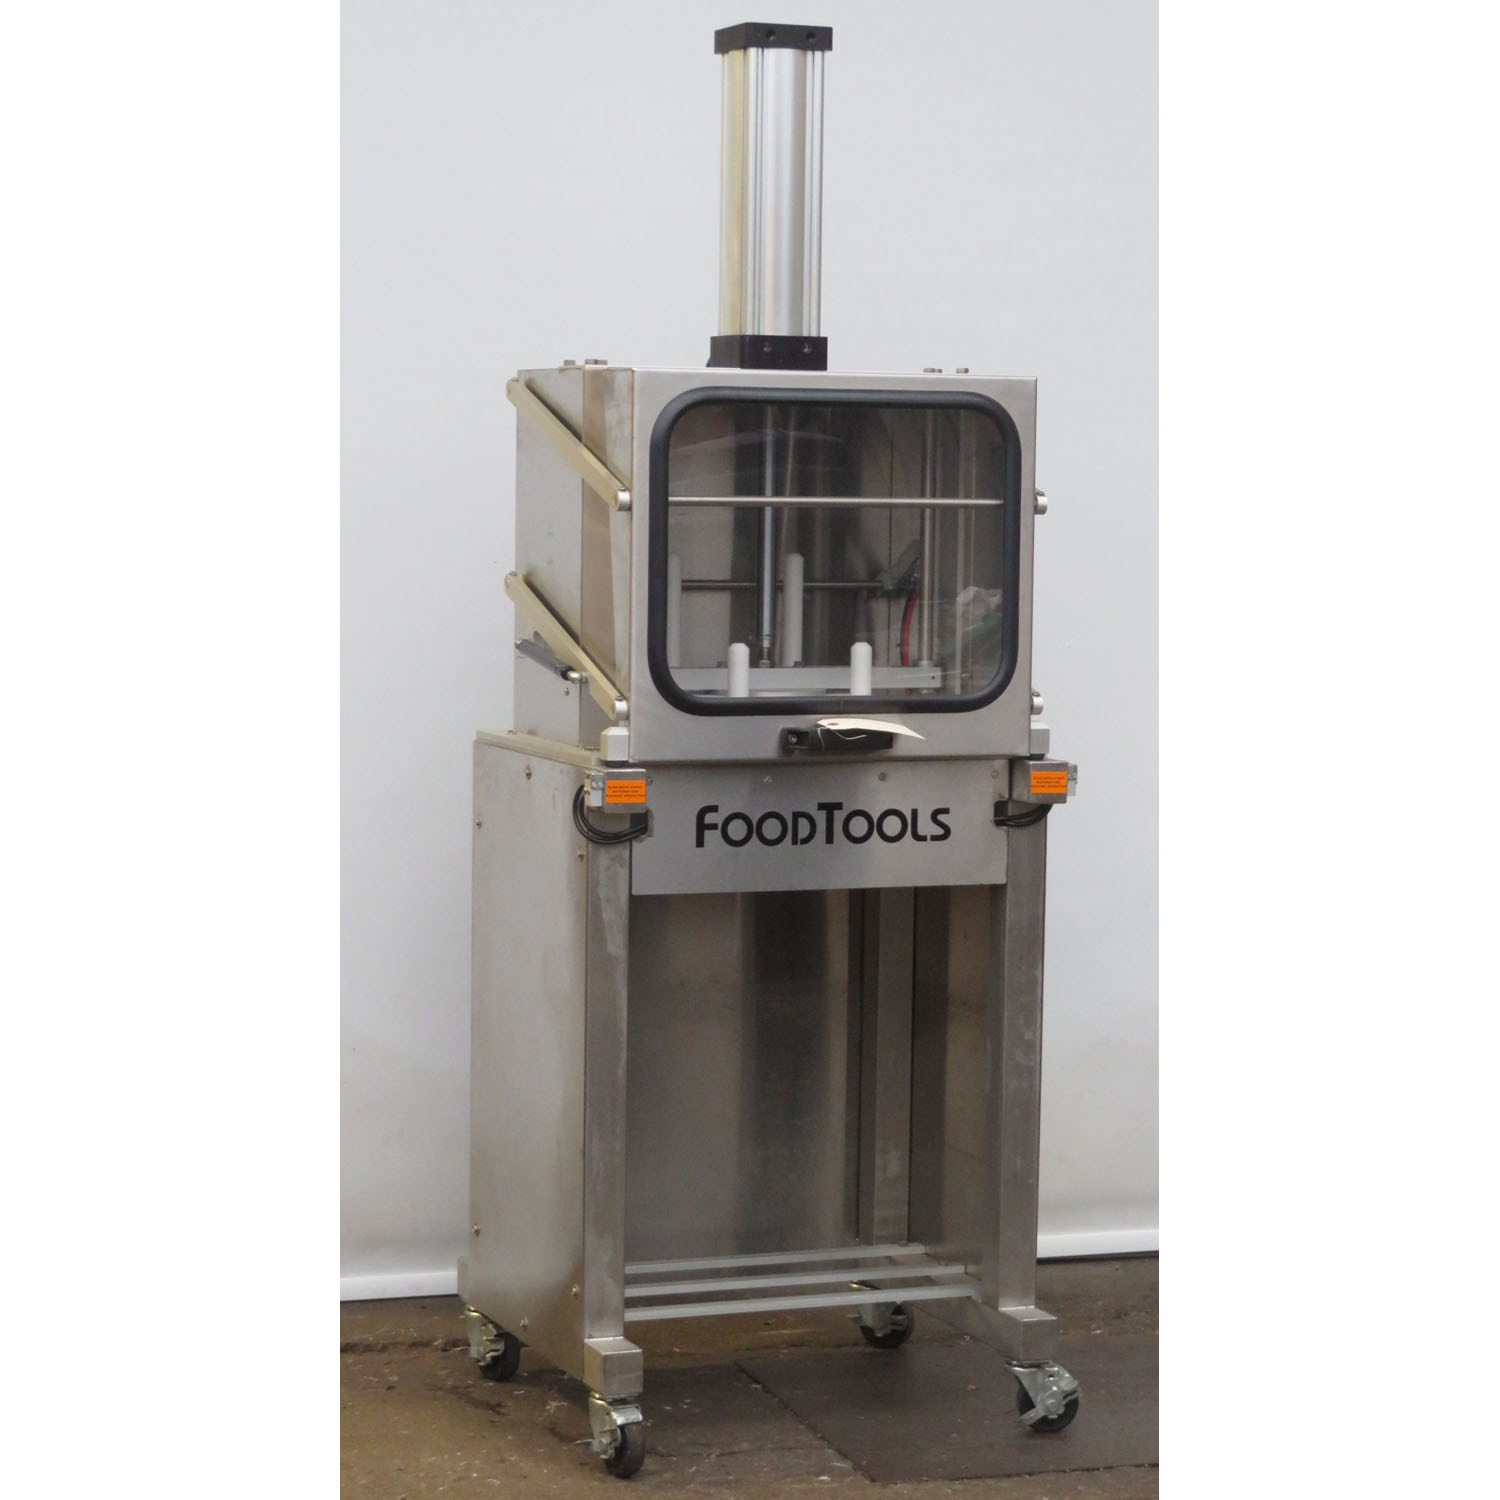 FoodTools TC-1 Tortilla and Pita Chip Slicing Machine, Used Excellent Condition